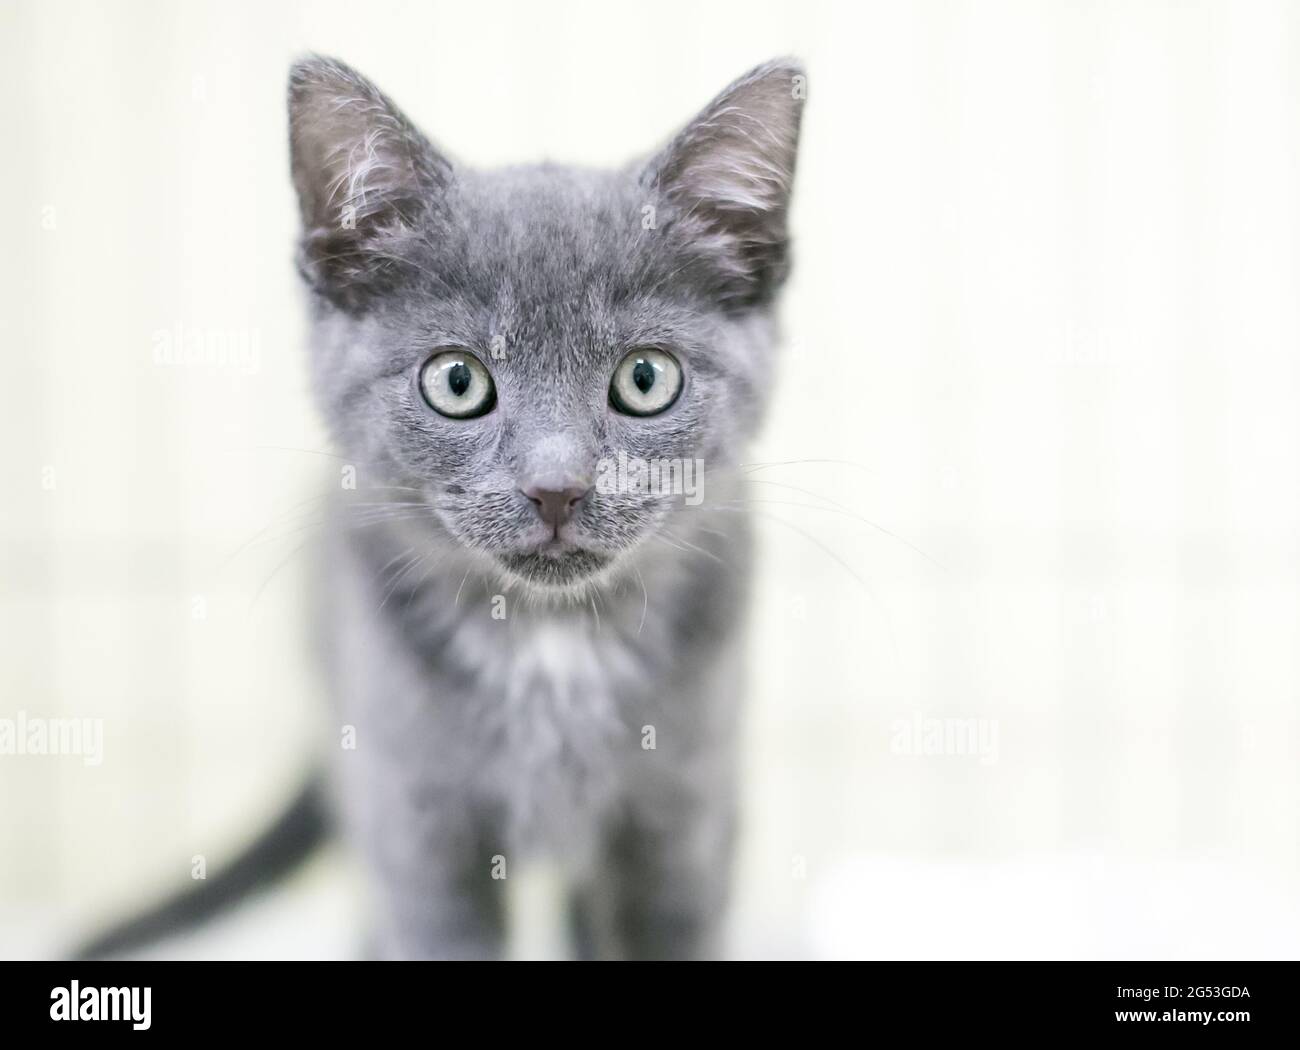 A young gray shorthair kitten looking at the camera Stock Photo